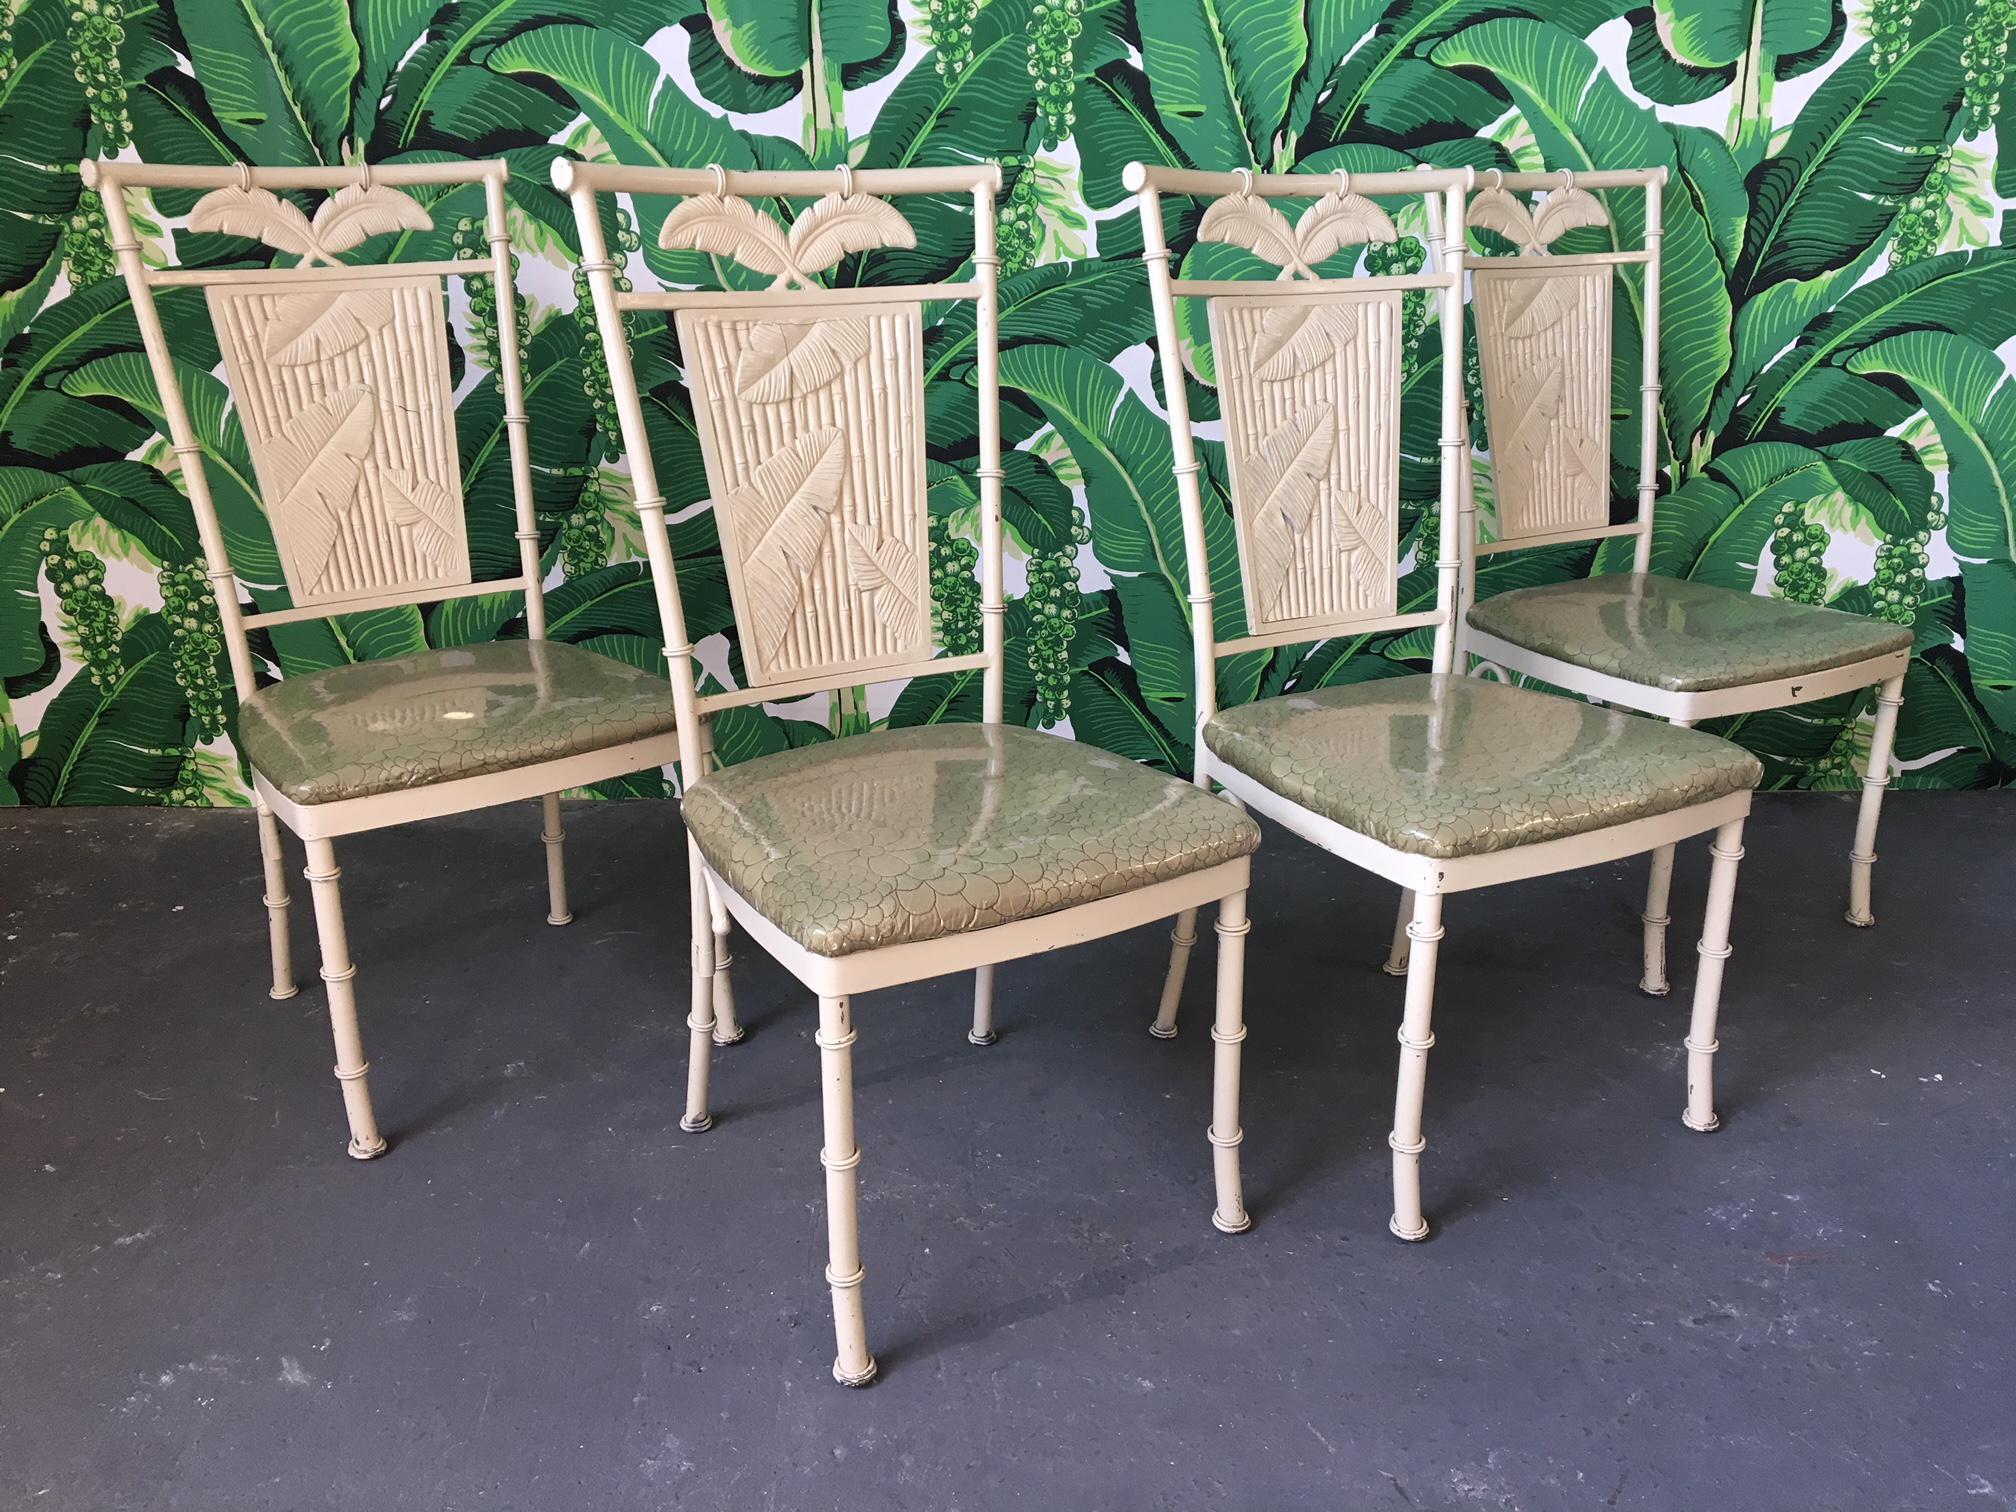 Set of four metal faux bamboo dining chairs with palm motif backs. Upholstered in green fabric with clear vinyl covering. Very heavy and solid with a steel frame construction. Good vintage condition with chips to finish and upholstery in near